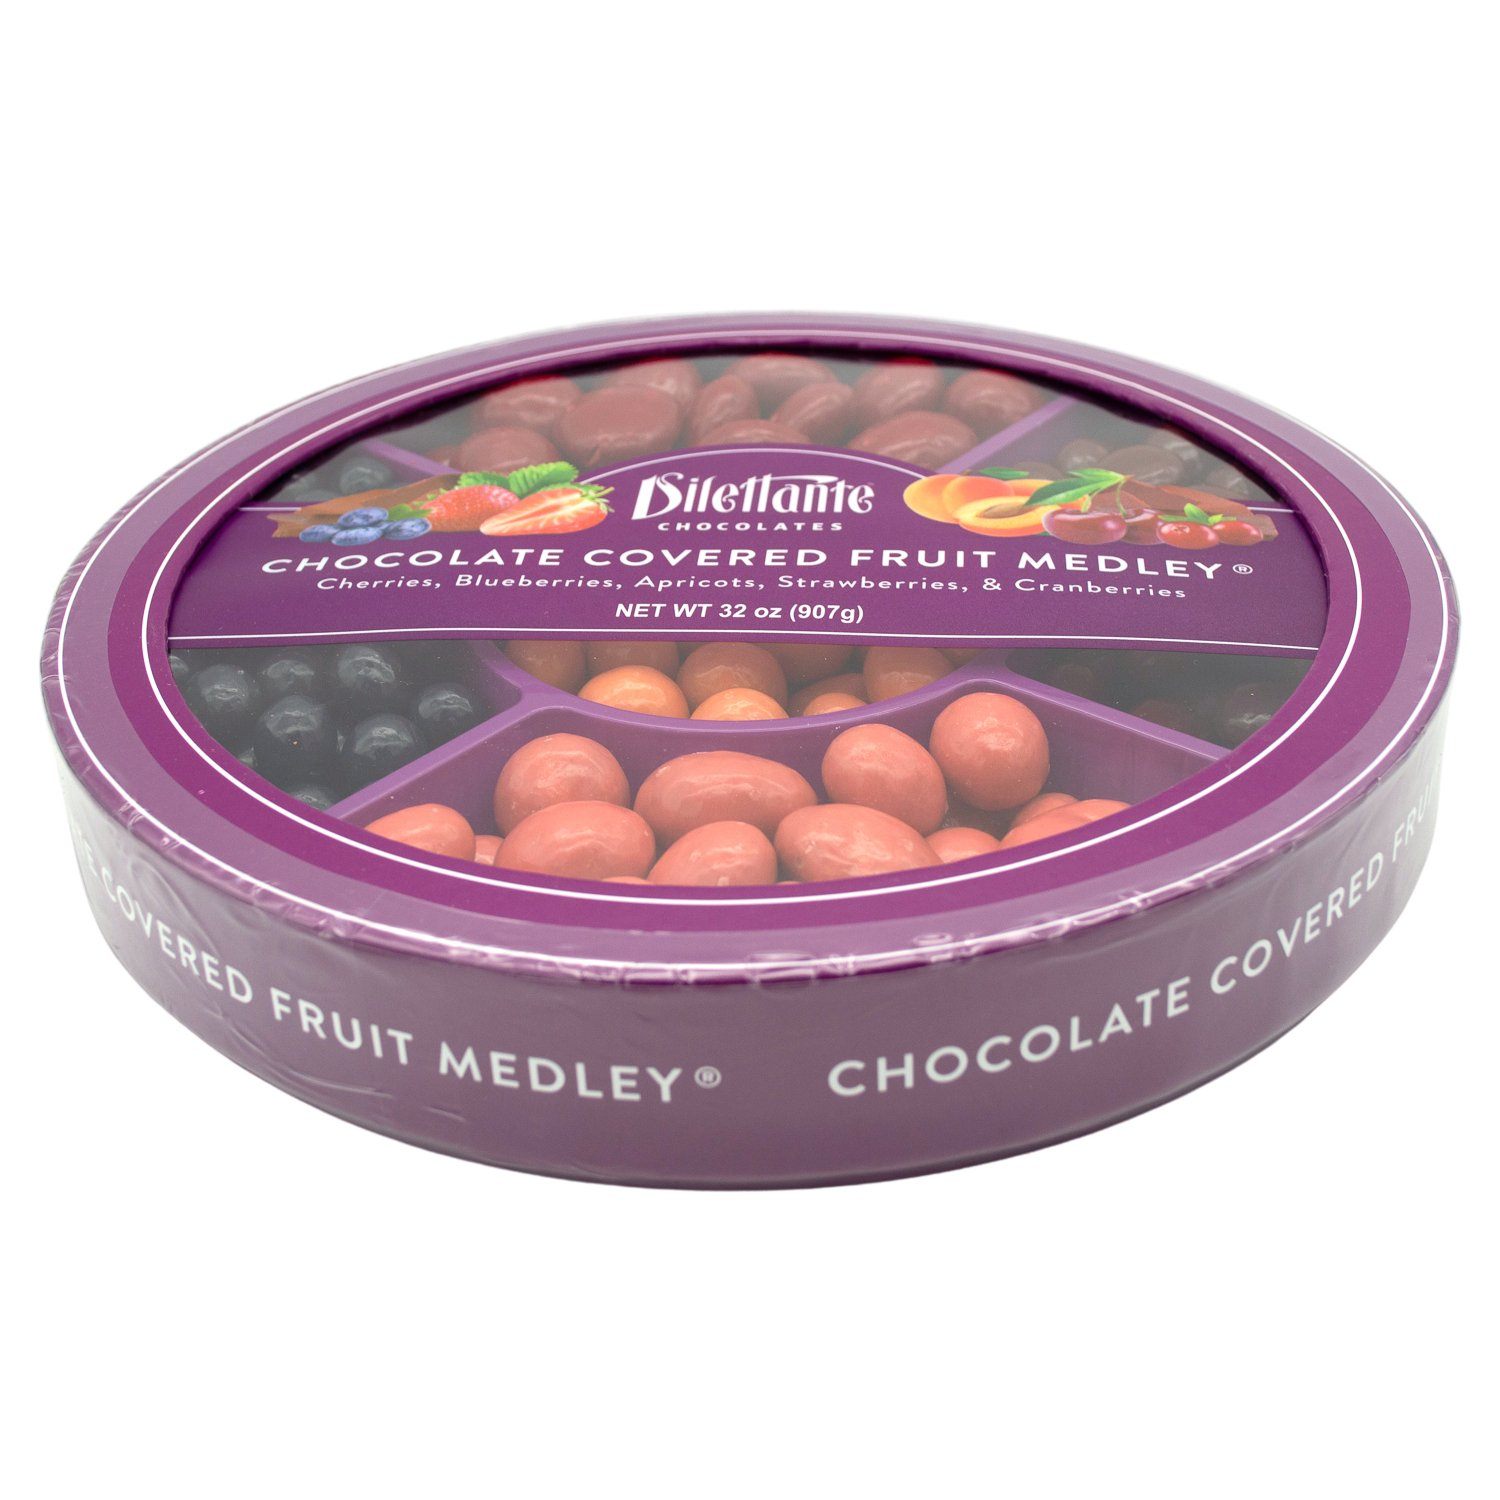 Dilettante Chocolate Covered Fruit Meltable Dilettante 